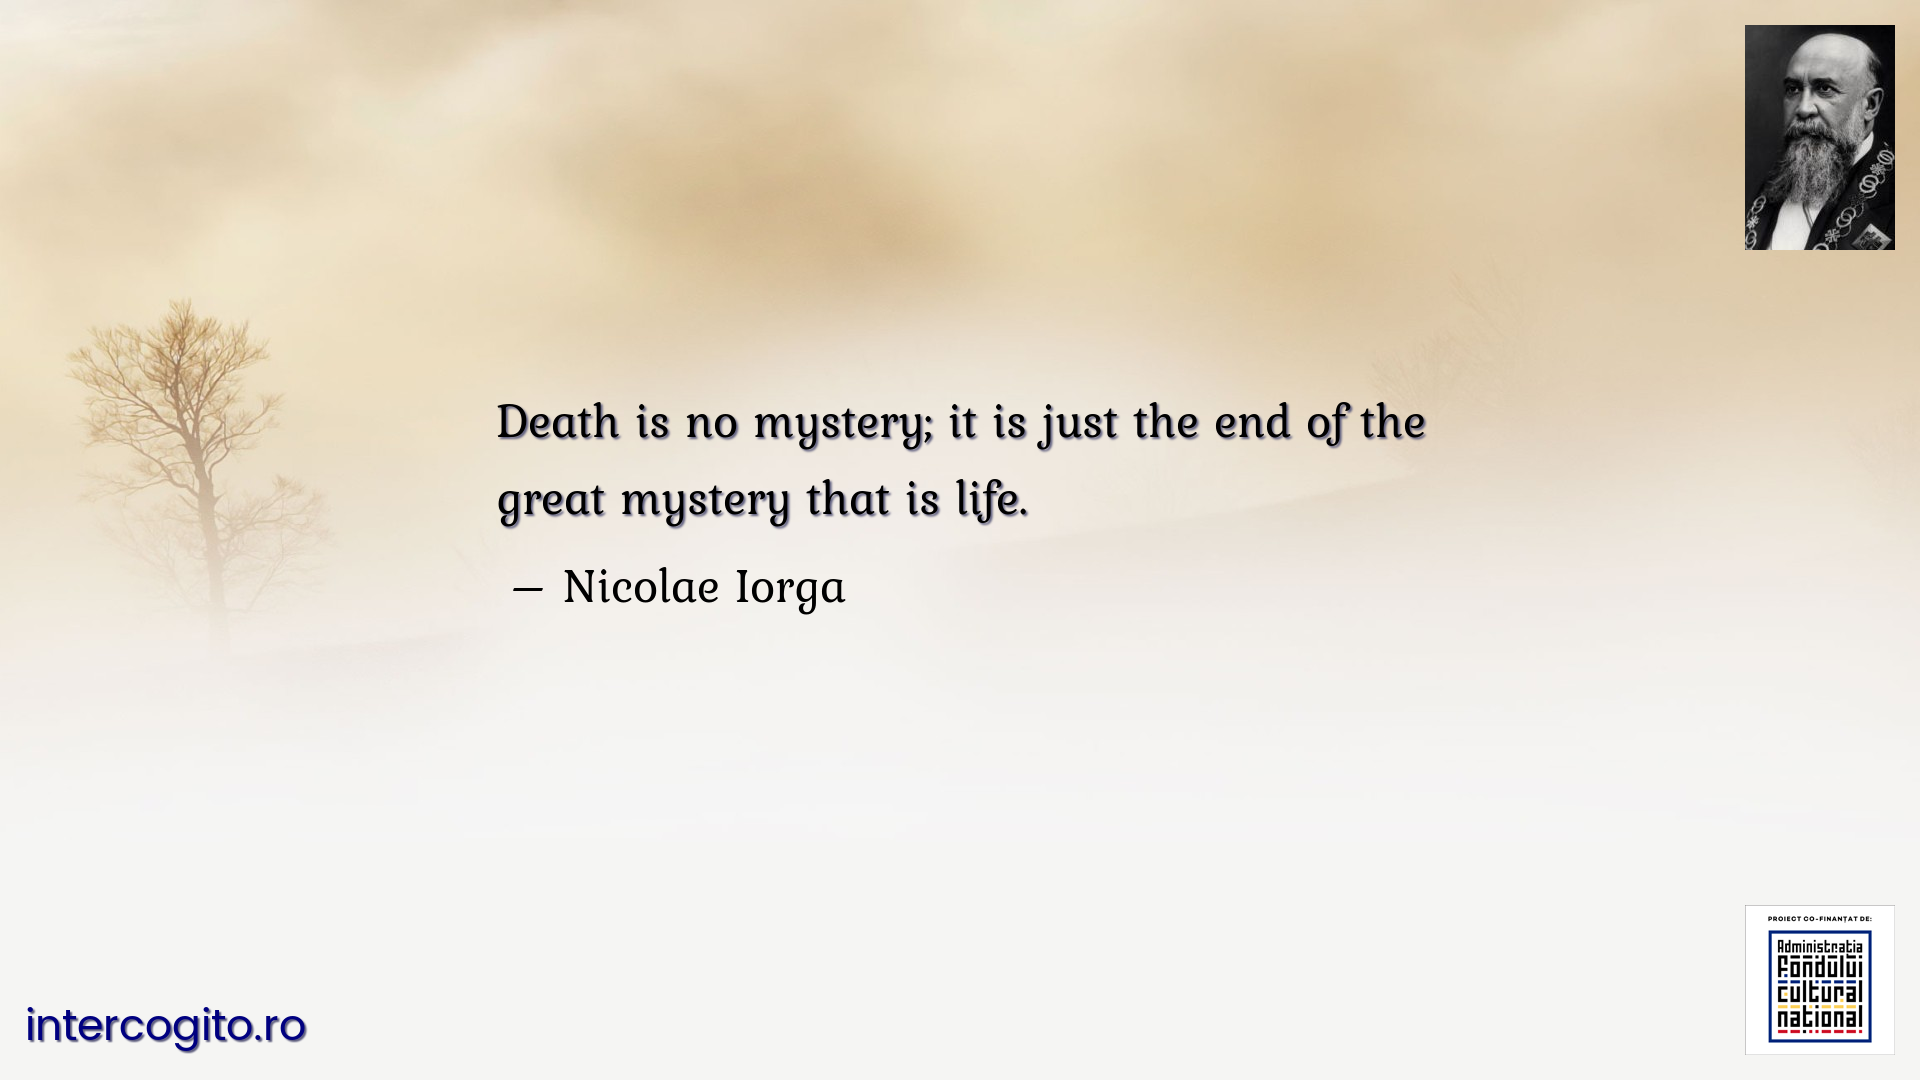 Death is no mystery; it is just the end of the great mystery that is life.